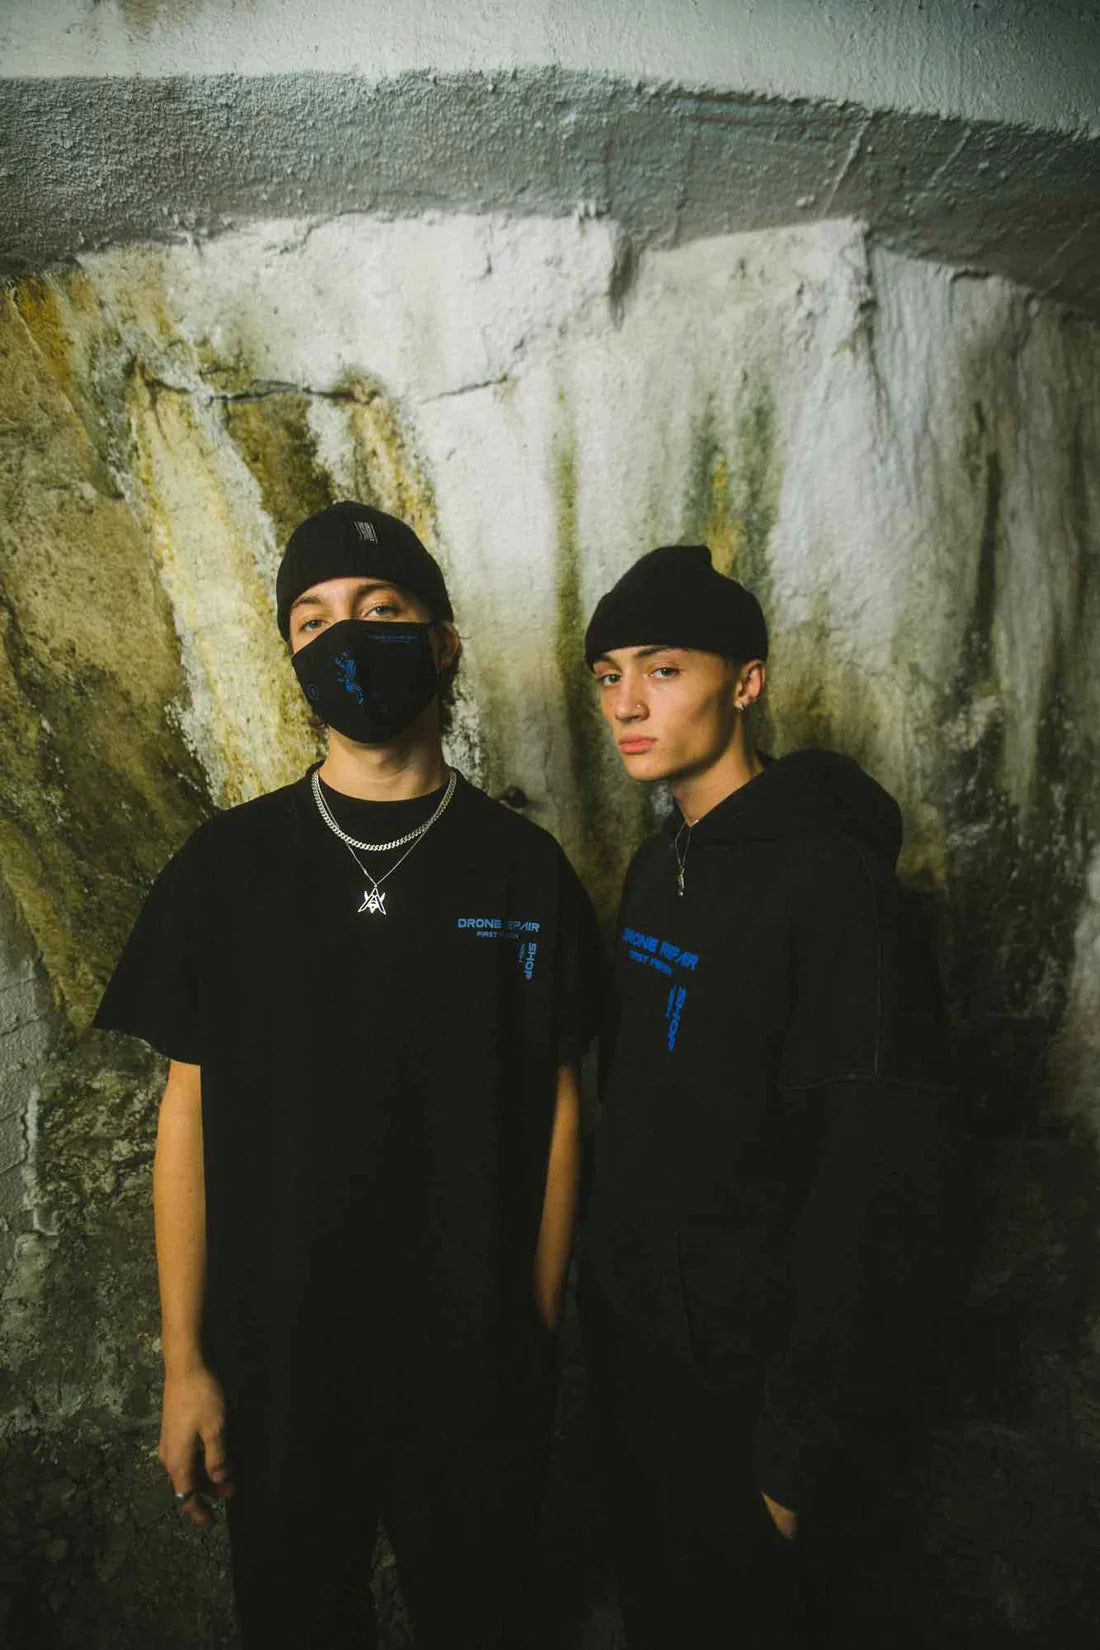 Two individuals standing against a mottled wall, one wearing a black Drone Repair Shop Mask with blue design, a black T-shirt, and the other in a black hoodie and beanie from the same collection, both with urban styling.